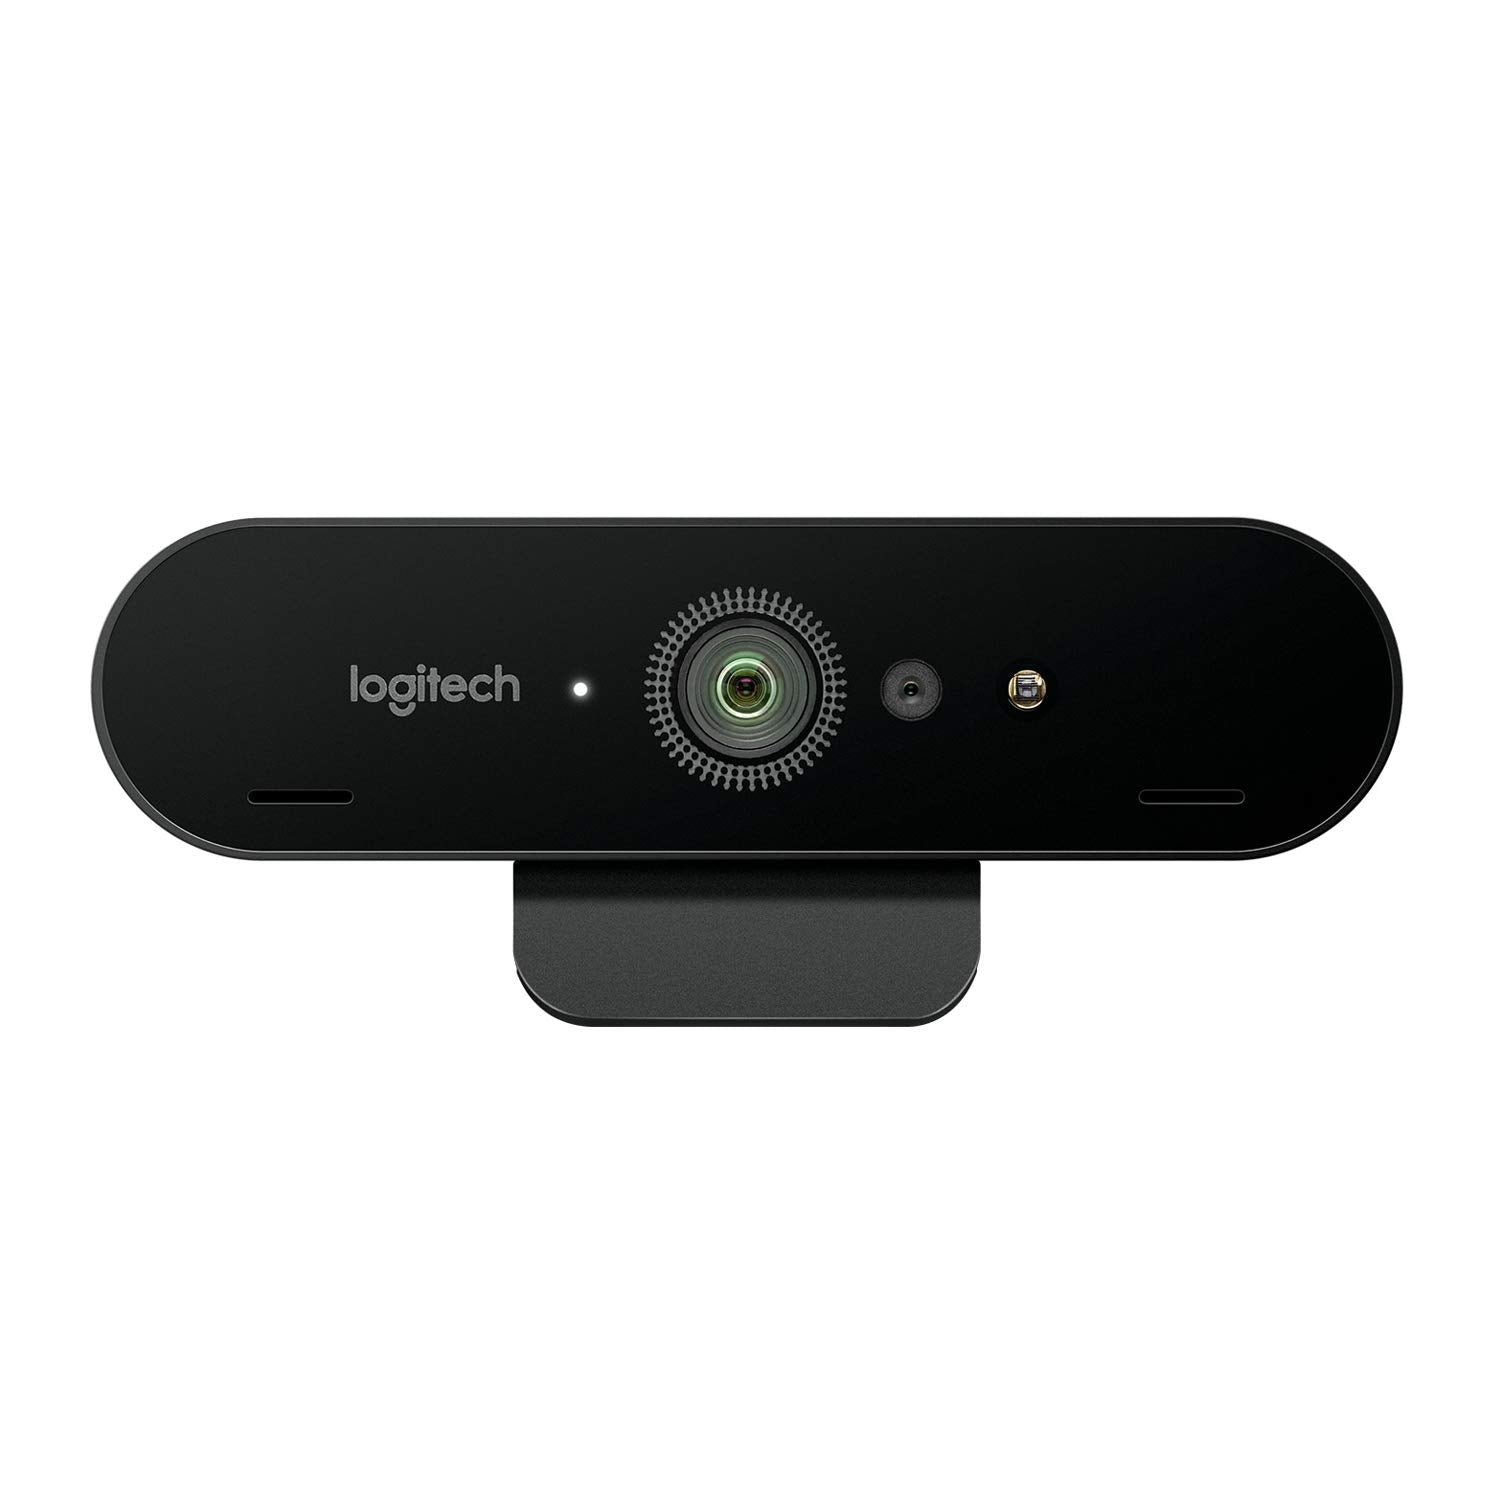 Thinking Tools, Inc - Official Online Store, A4TECH PK-925H 1080P HD WEBCAM  WITH BUILT IN MIC, thinkingtools@mall, Shop Now & Save More!